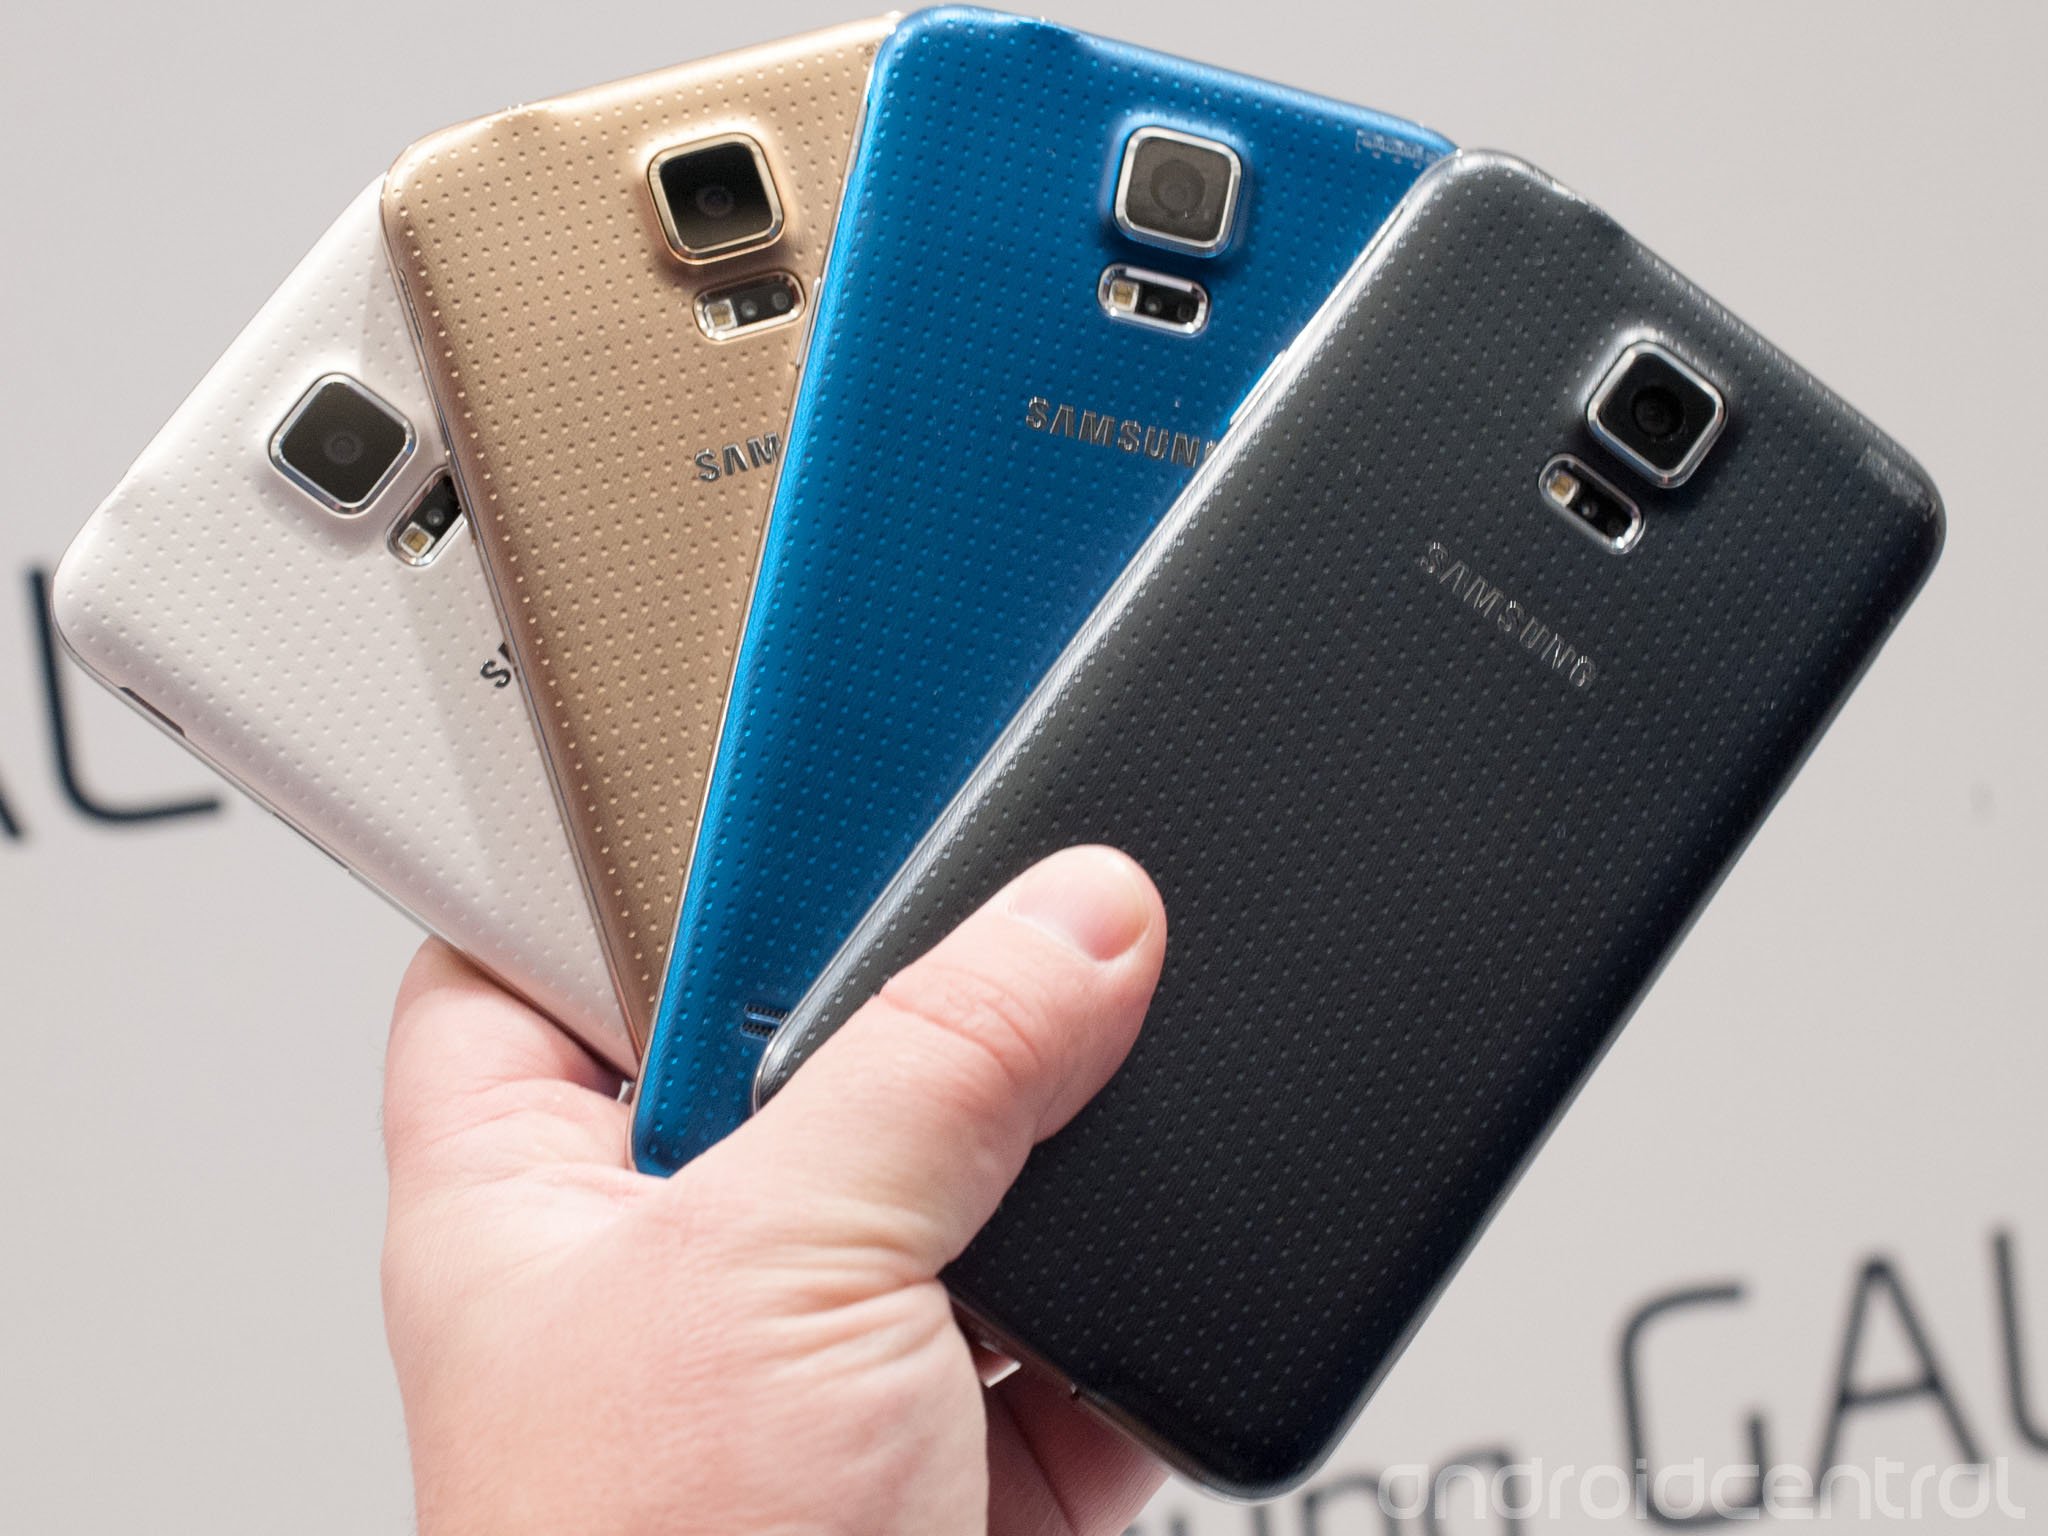 http://www.androidcentral.com/sites/androidcentral.com/files/styles/large/public/article_images/2014/02/galaxy-s5-10.jpg?itok=LM9gl4qm